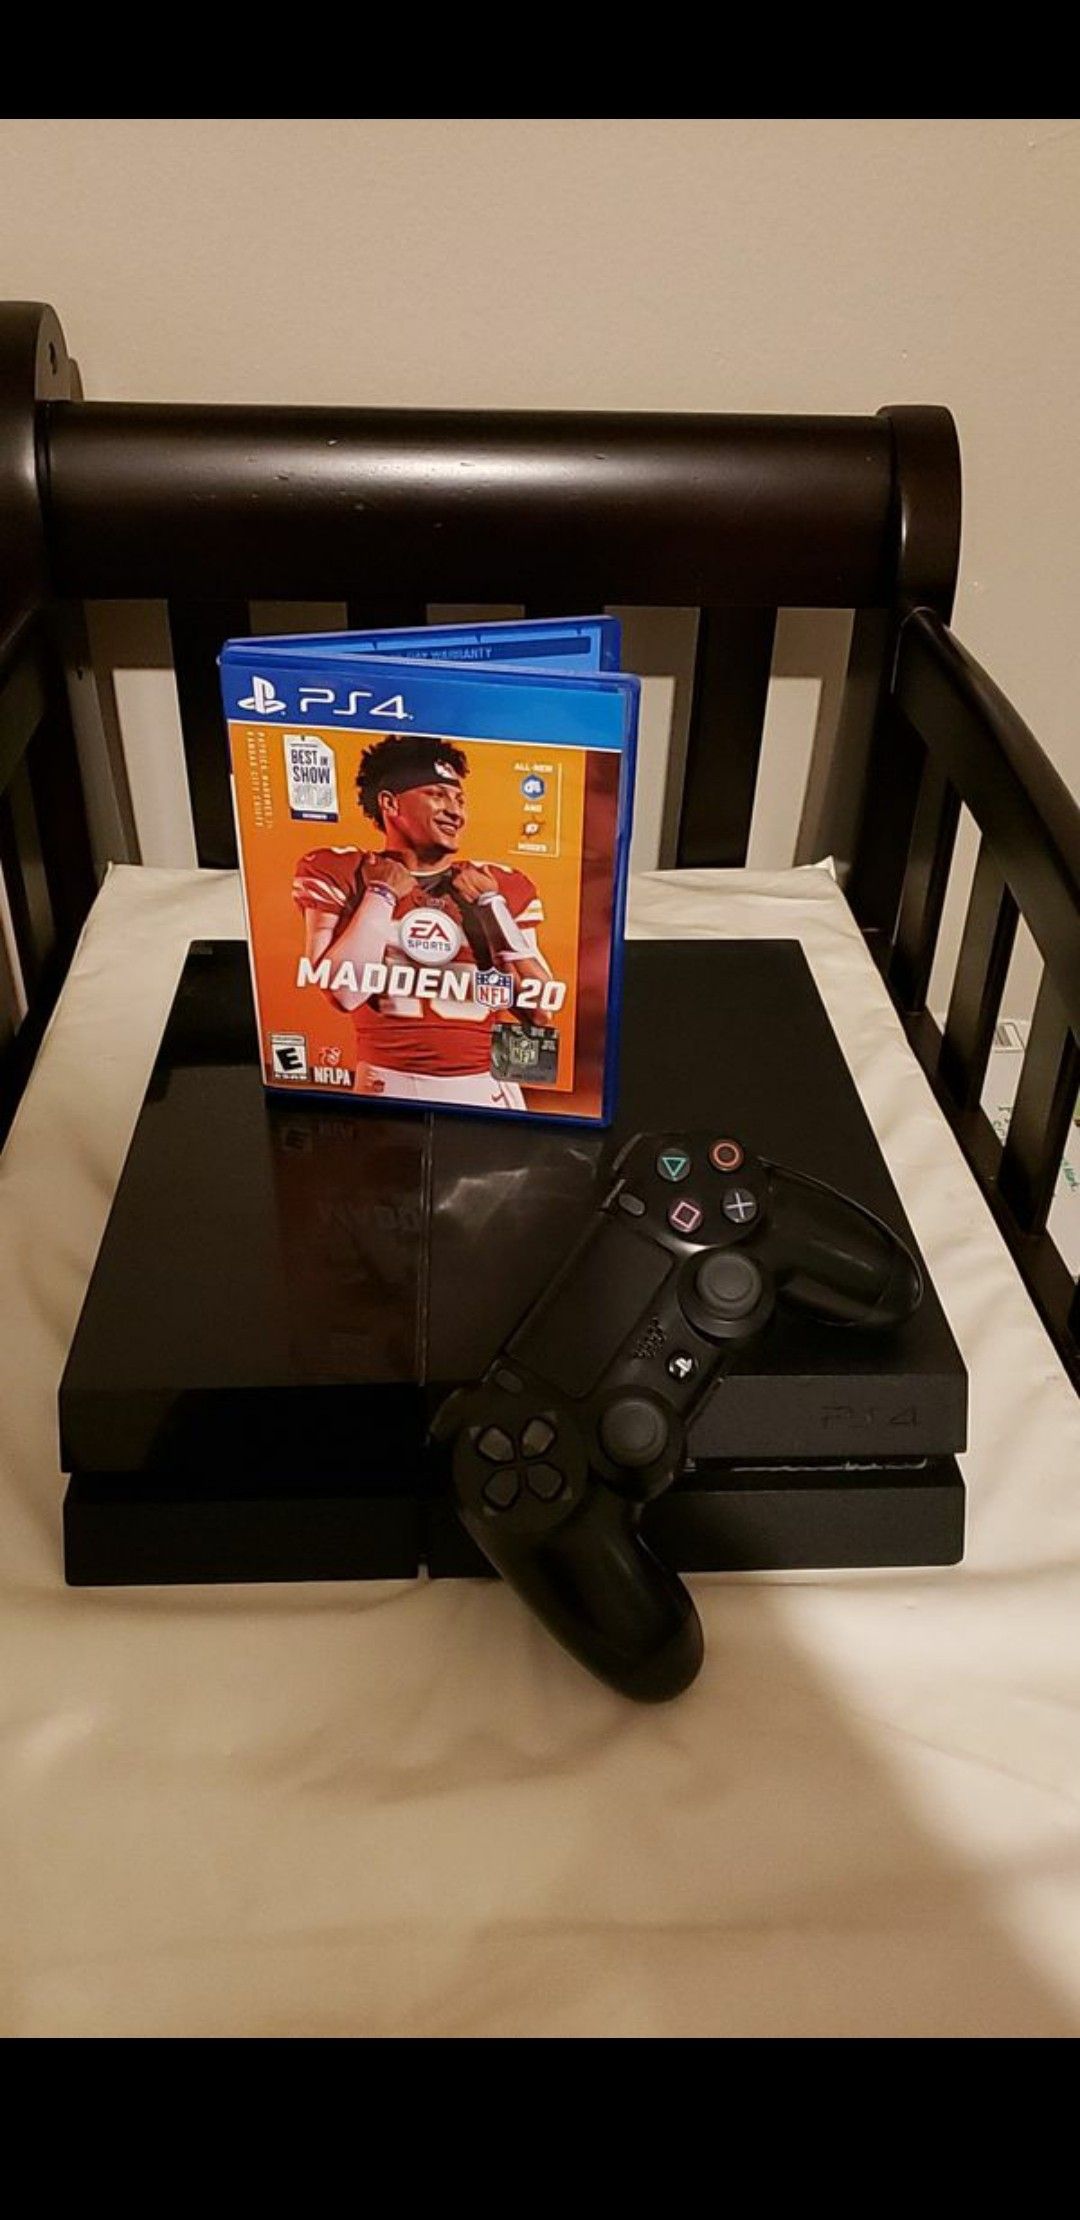 Ps4 slim 1tb with madden 2020